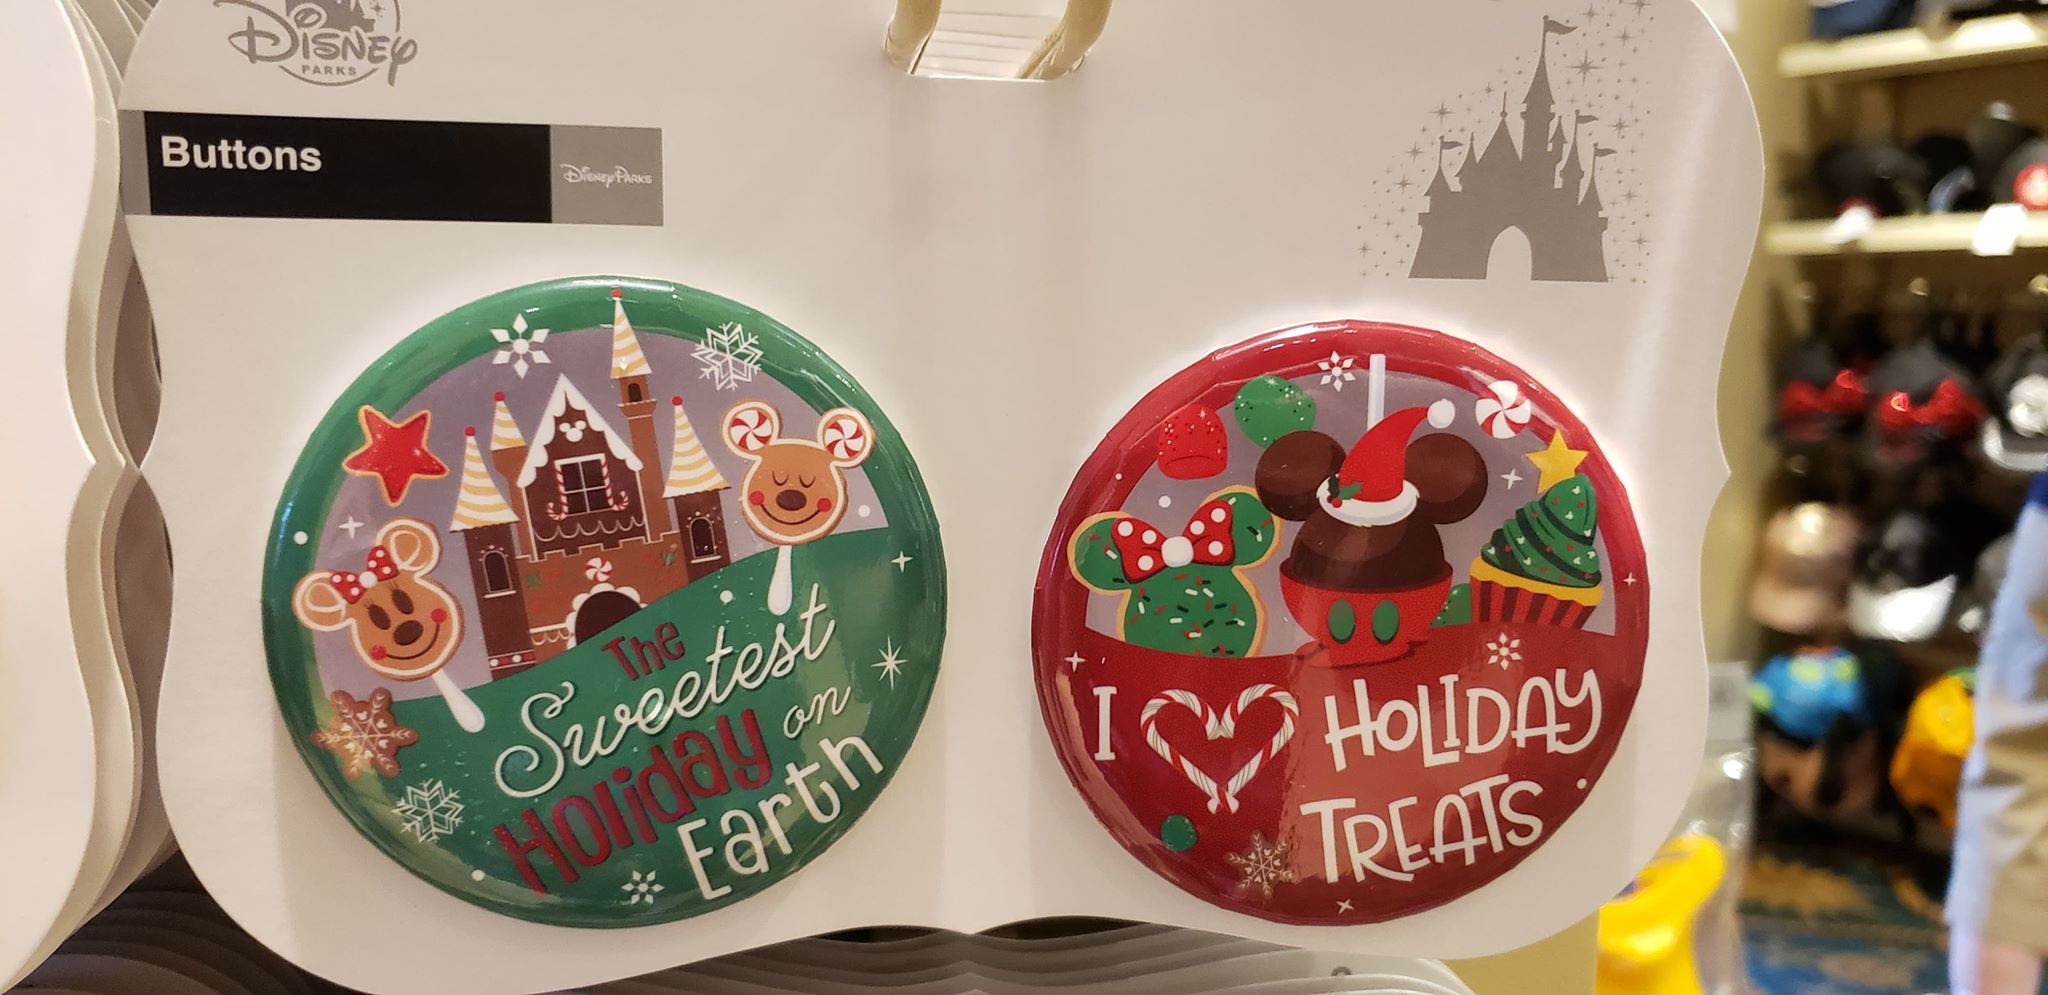 New Disney Holiday Celebration Buttons Have Arrived At The Disney Parks